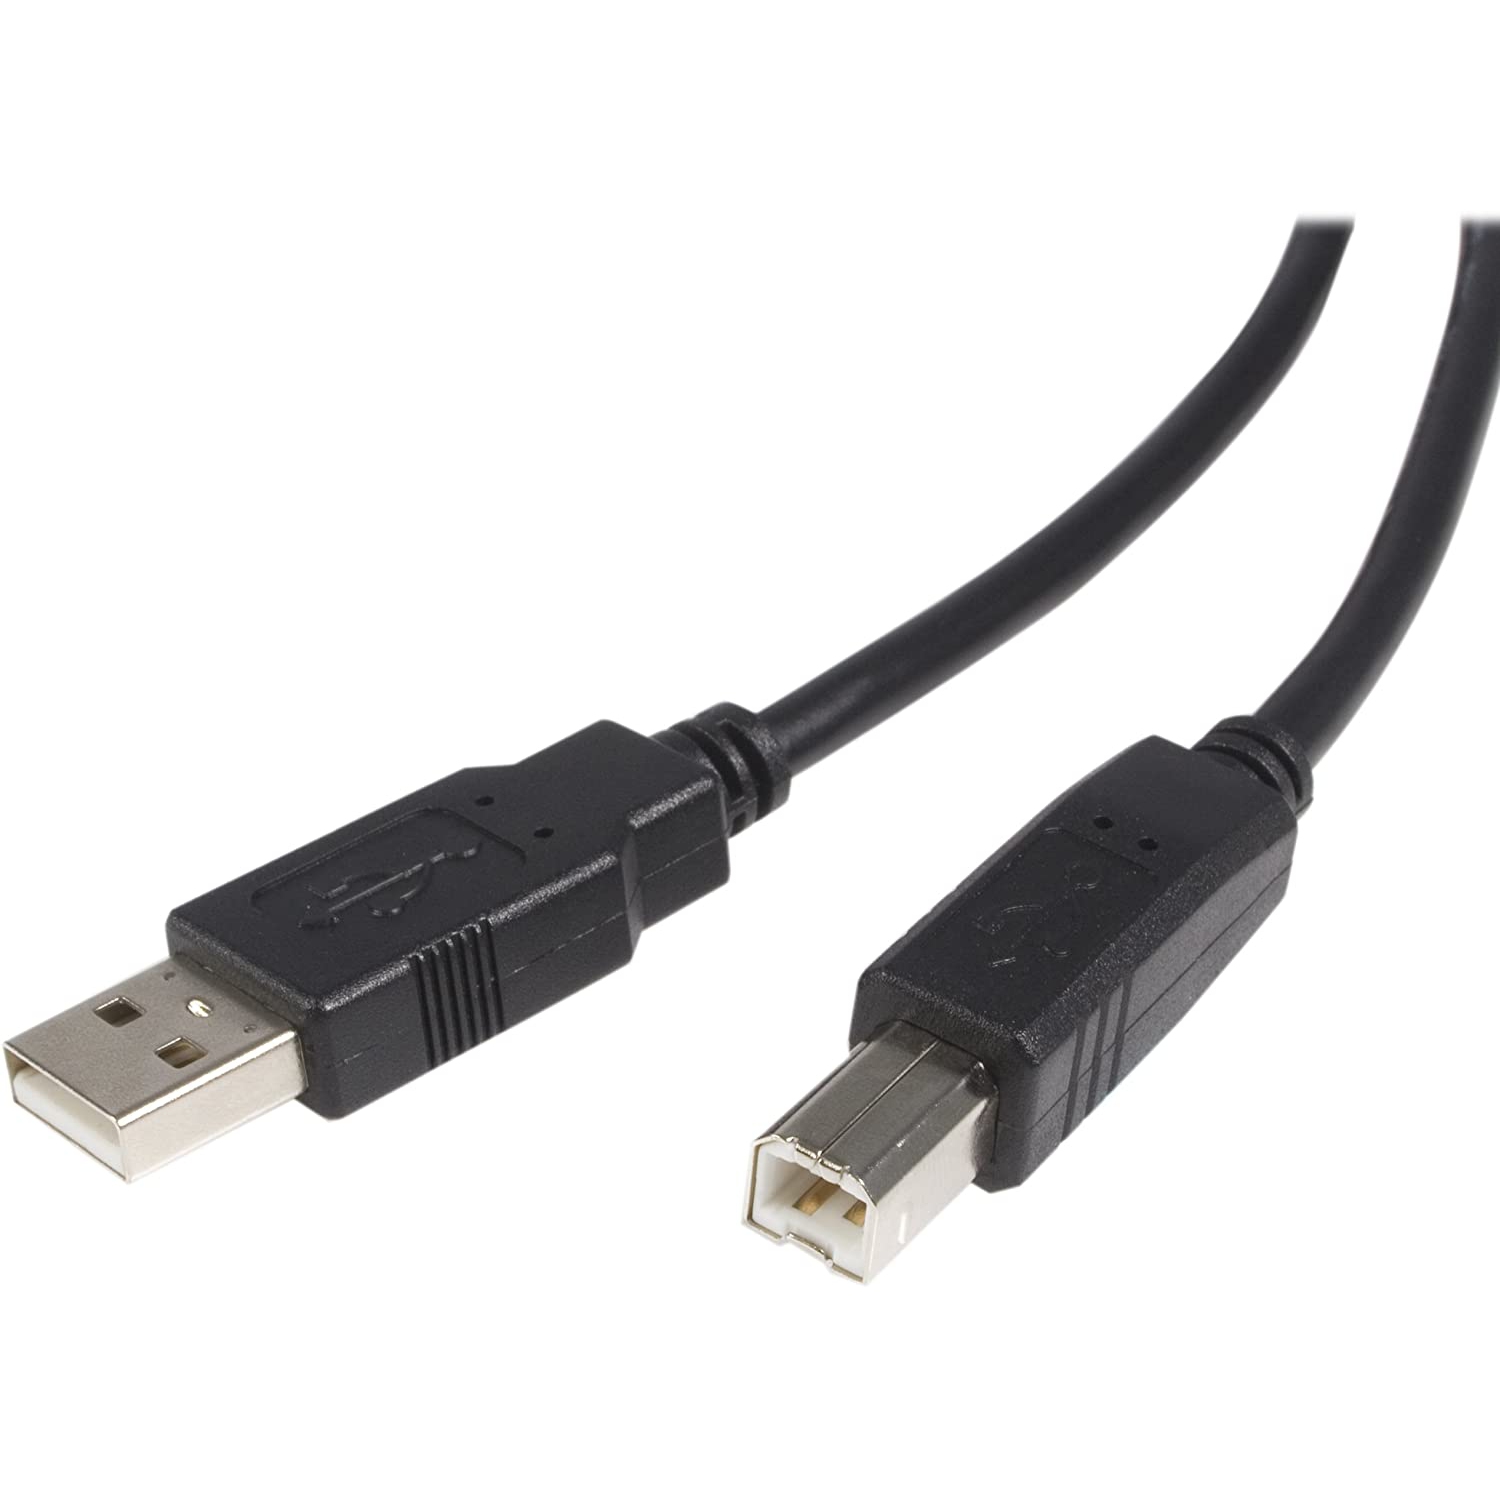 HYFAI Printer Printing Cable (6ft/2m) USB 2.0 Type A Male to B Male - Computer Scanner Cord for Brother, HP, Canon and More…